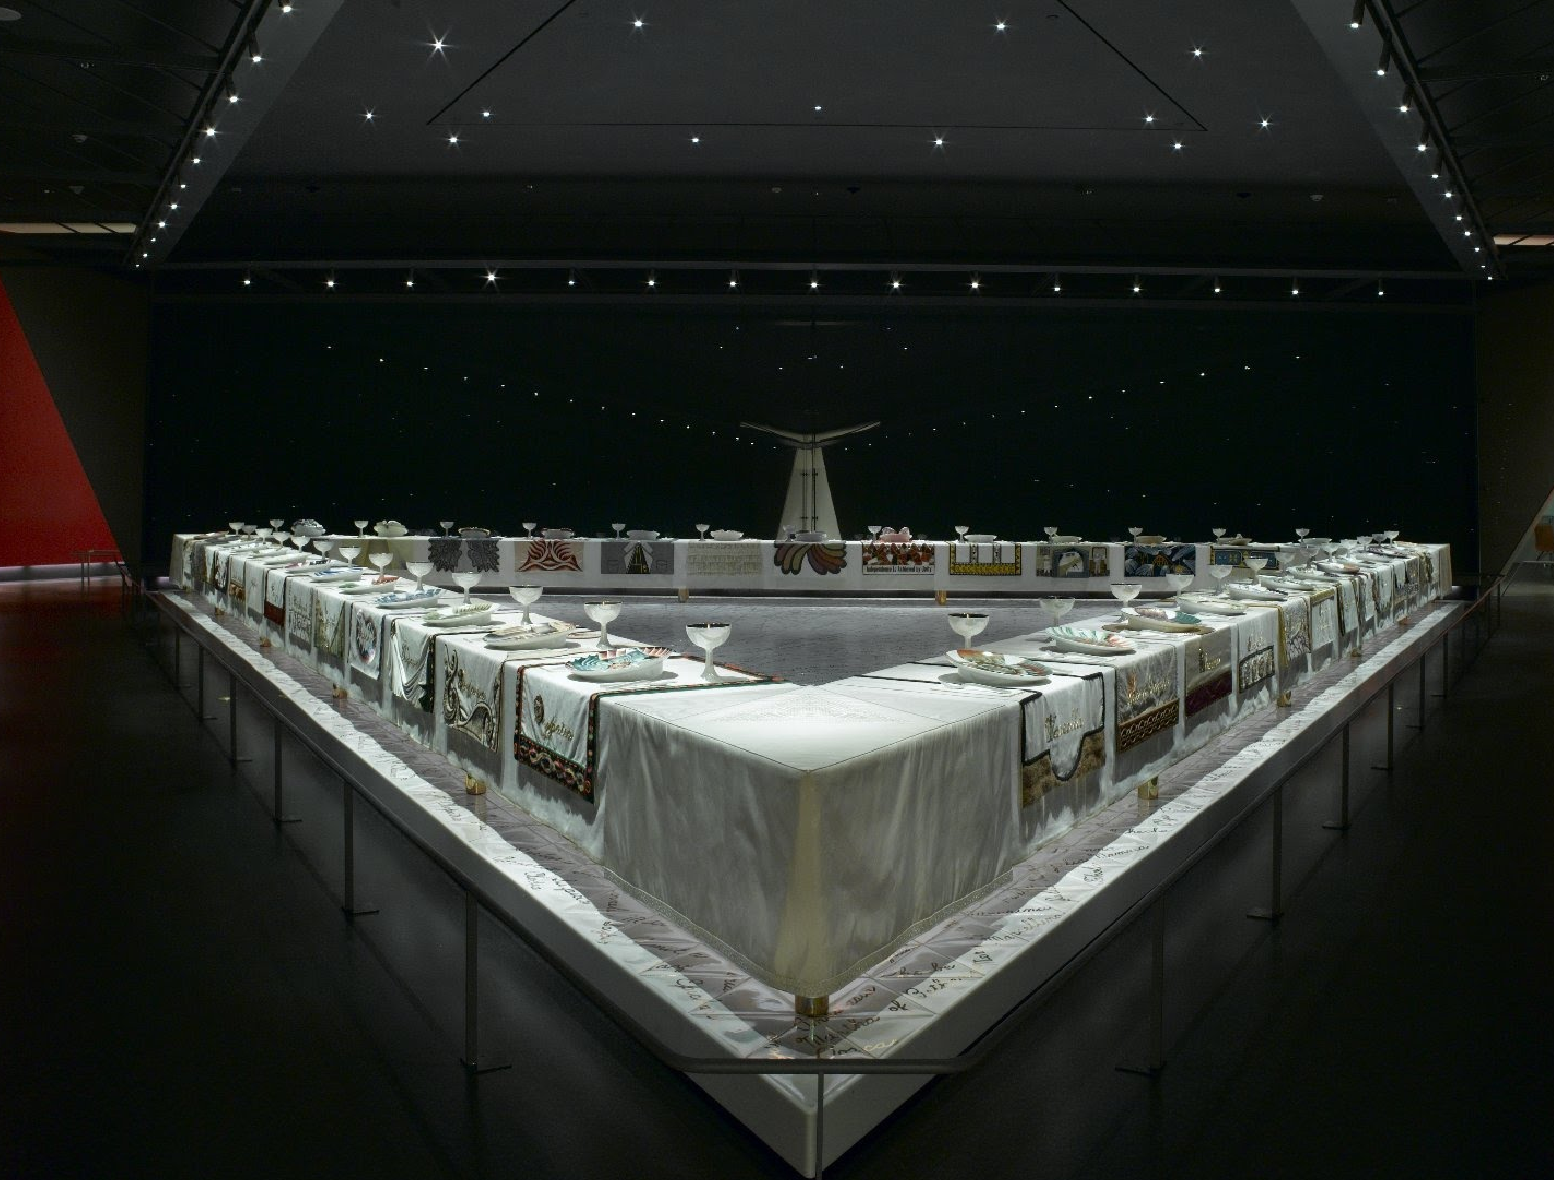 The Dinner Party Judy Chicago